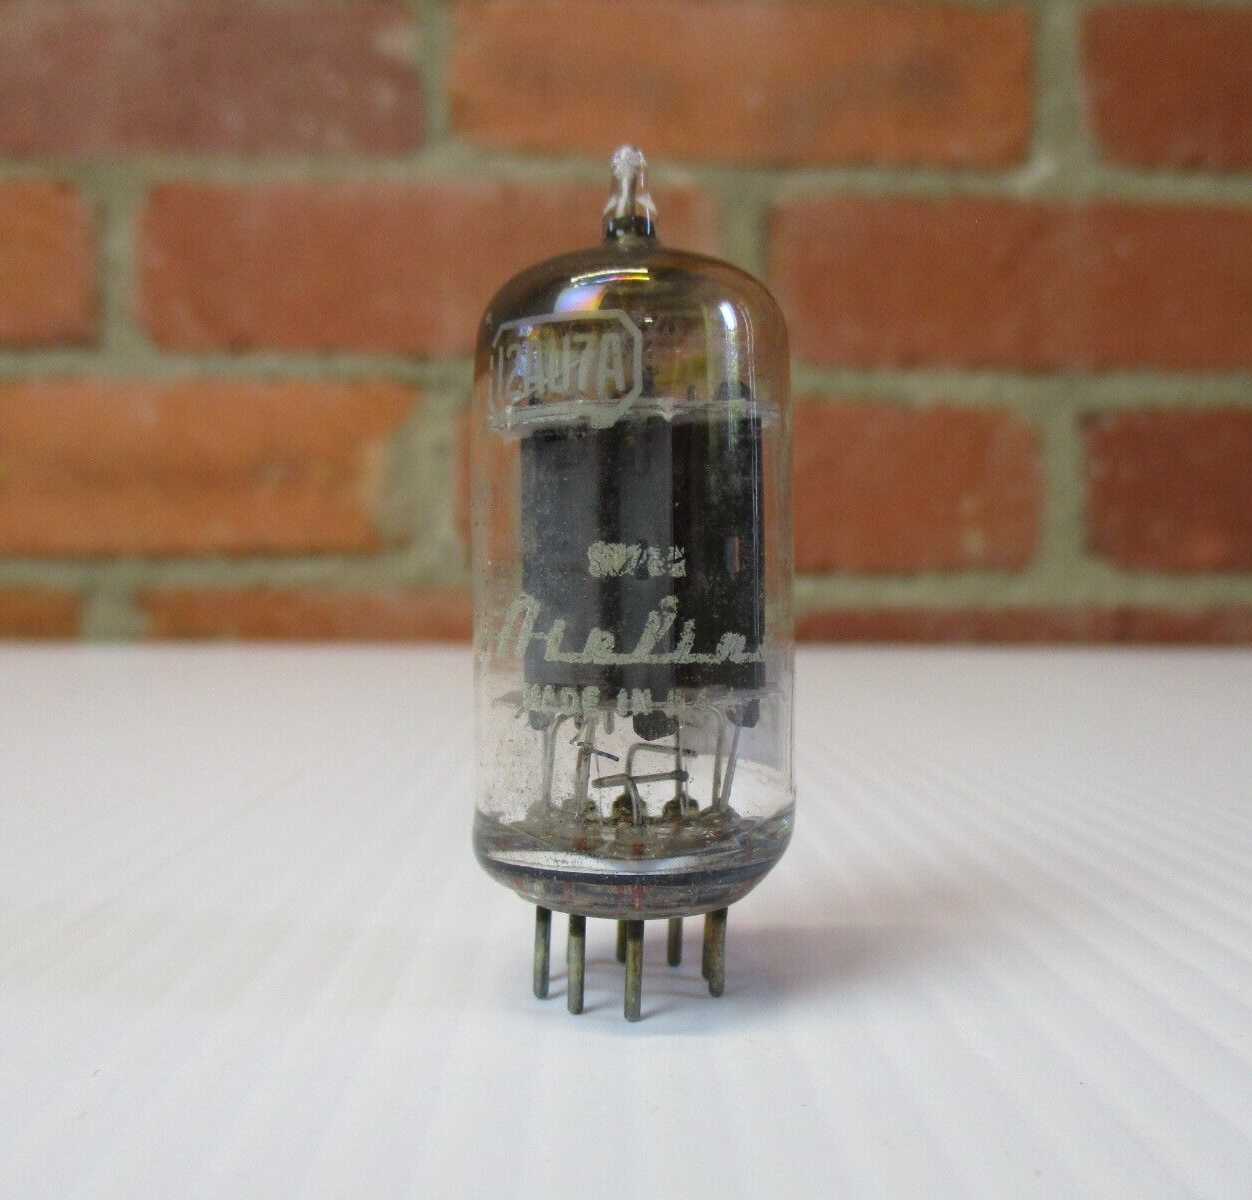 RCA 12AU7A ECC82 Vacuum Tube Long Gray Plate Square Getter TV-7 Tested Strong - $10.50